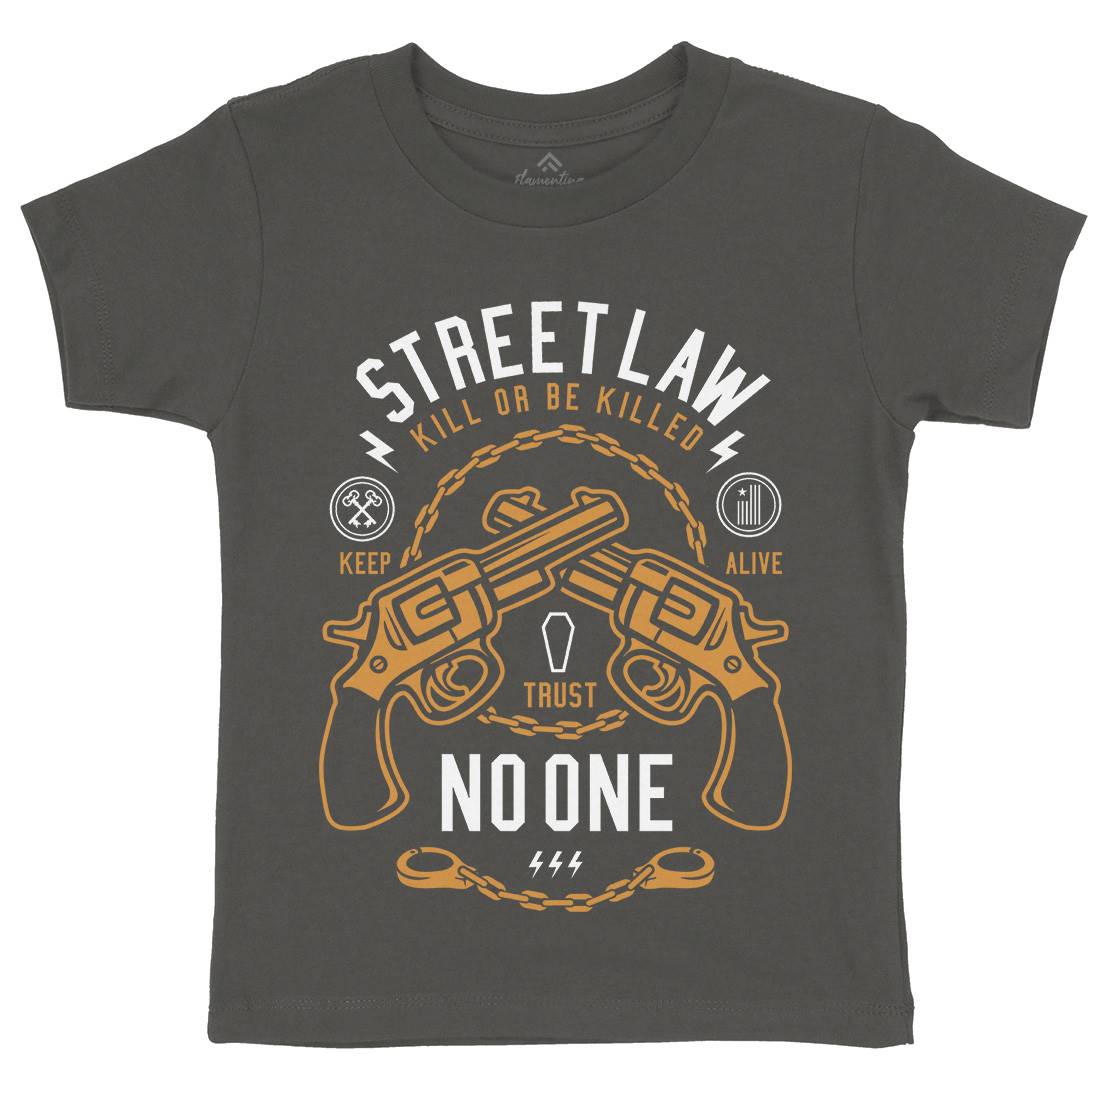 Street Law Kids Crew Neck T-Shirt Quotes A286